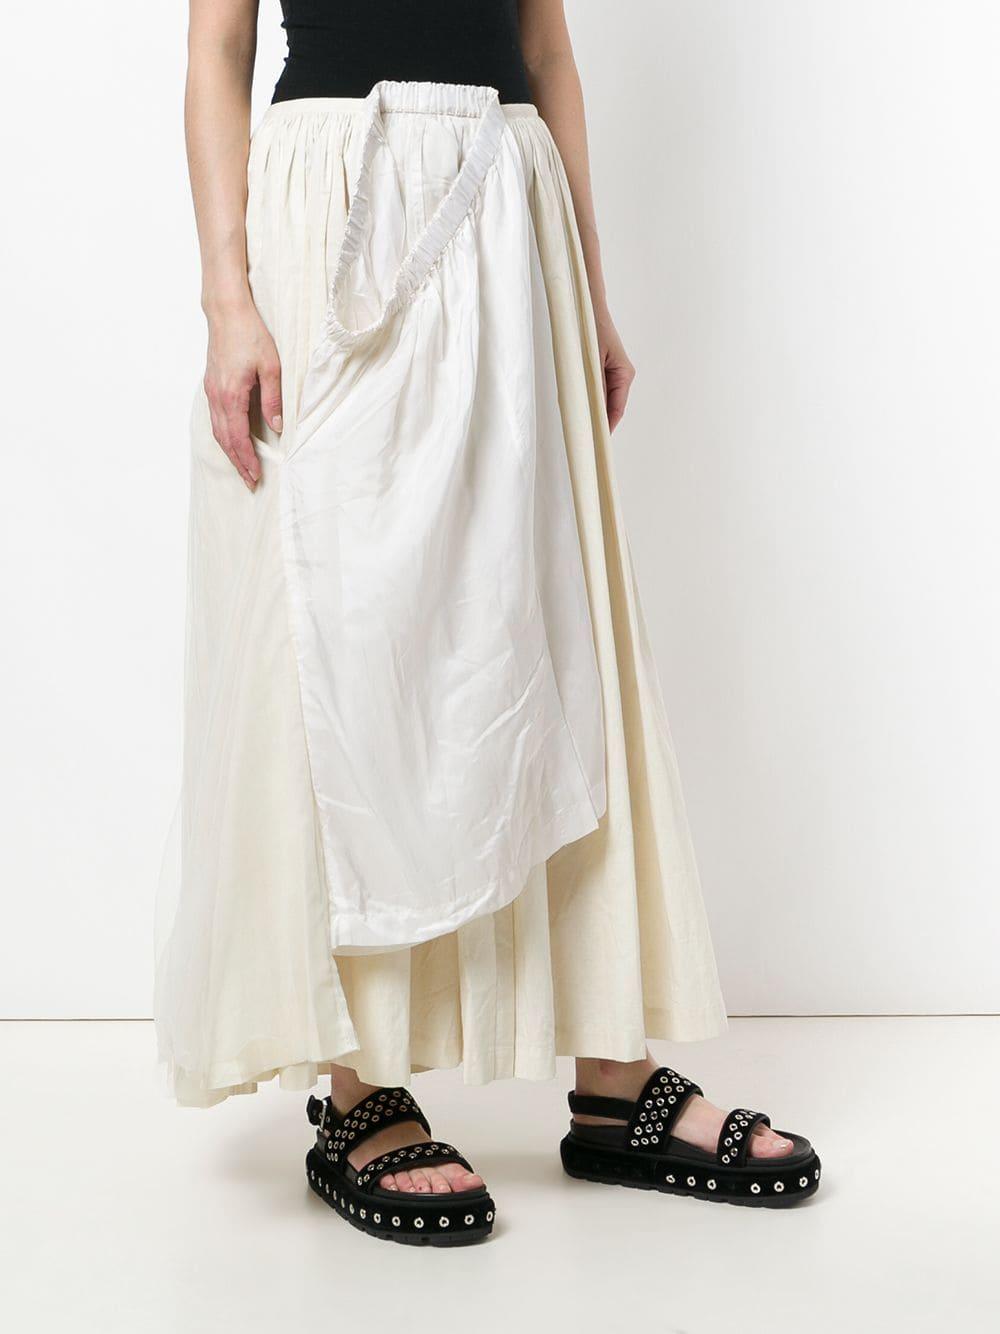 Comme des Garçons white and ivory white cotton blend layered mid rise maxi skirt, with a tubular designed waistband, a concealed metal hooks fastening, lightly pleated design and a fake white petticoat appliqué to the front. 

Years: 90s

Size: